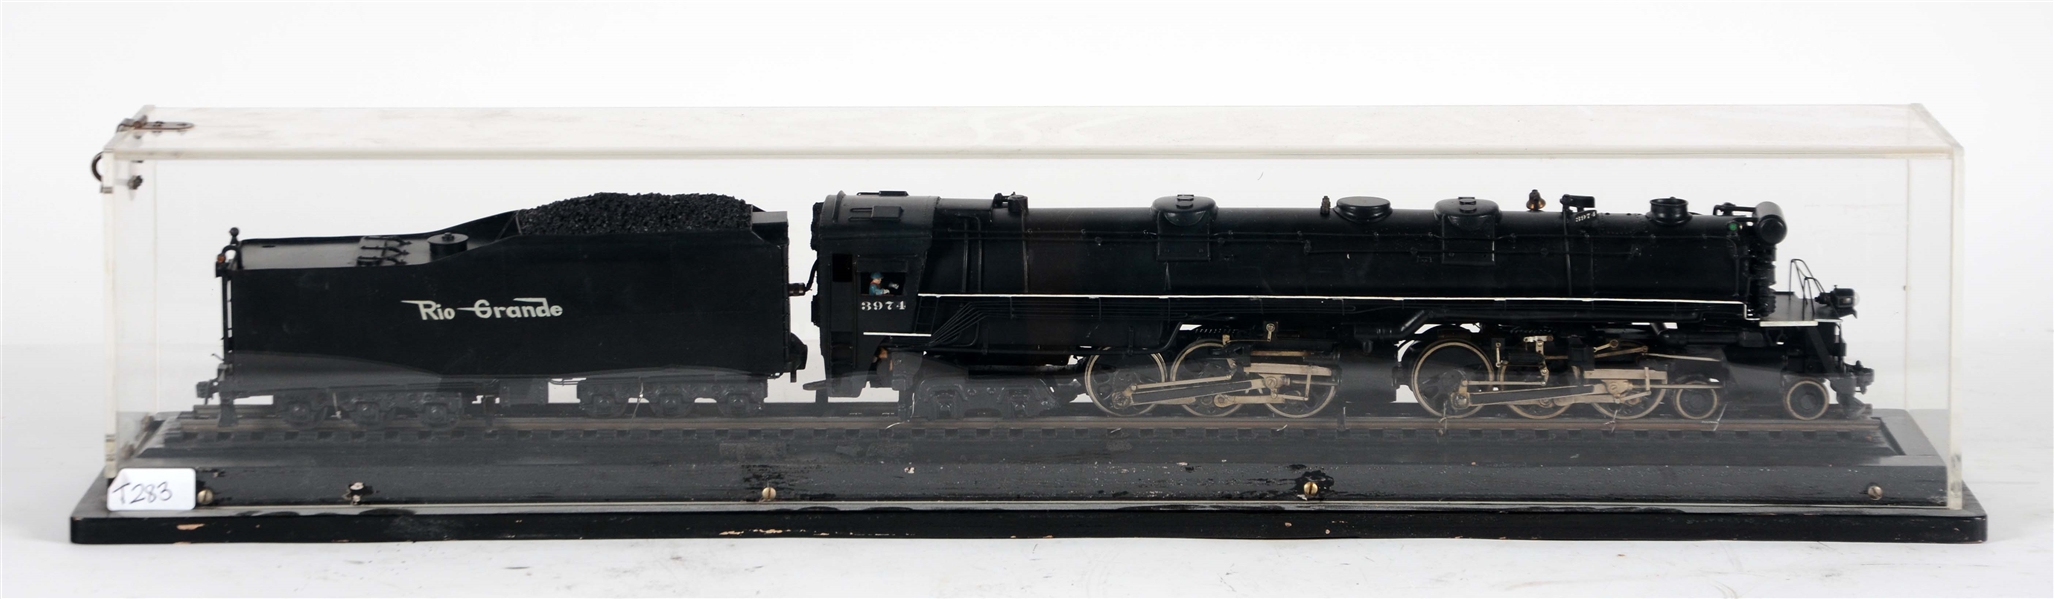 BRASS MODEL OF A RIO GRANDE STEAM LOCOMOTIVE AND TENDER IN DISPLAY CASE.